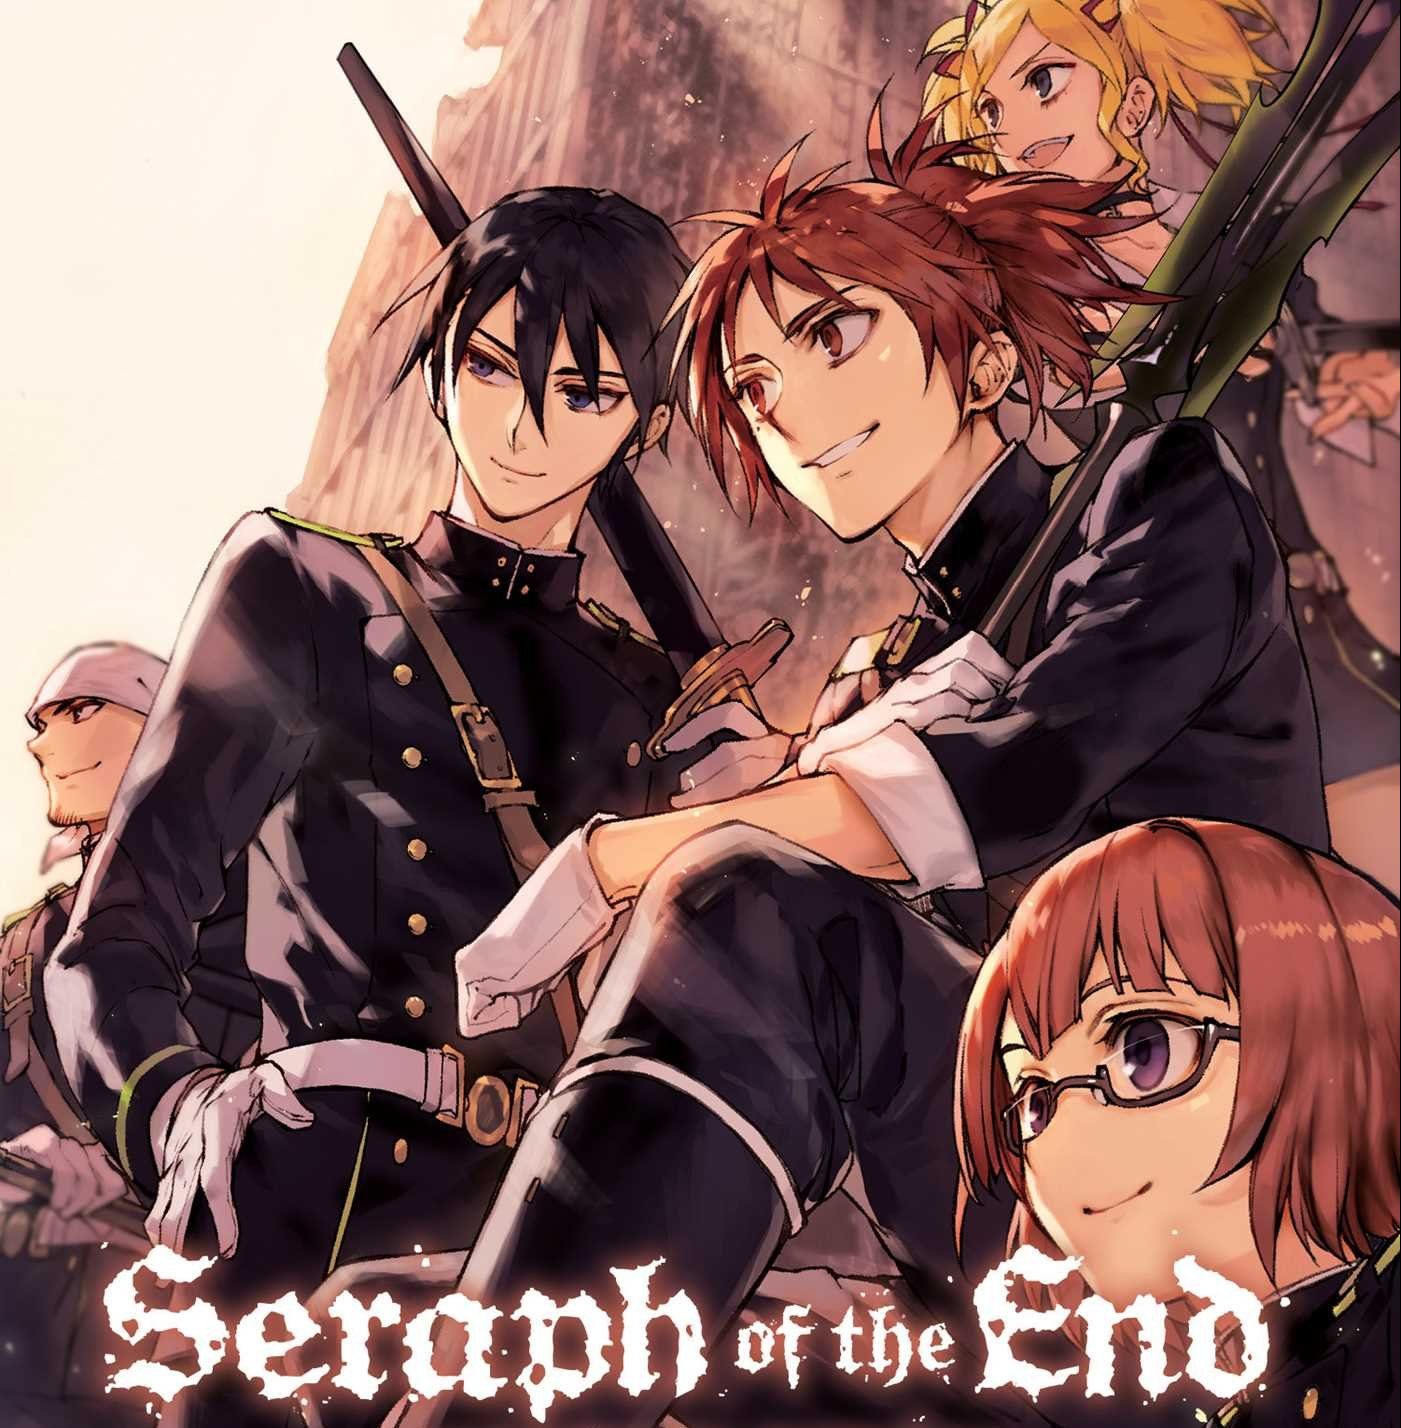 Seraph of the End Chapter 106 Release Date, Plot & Much More